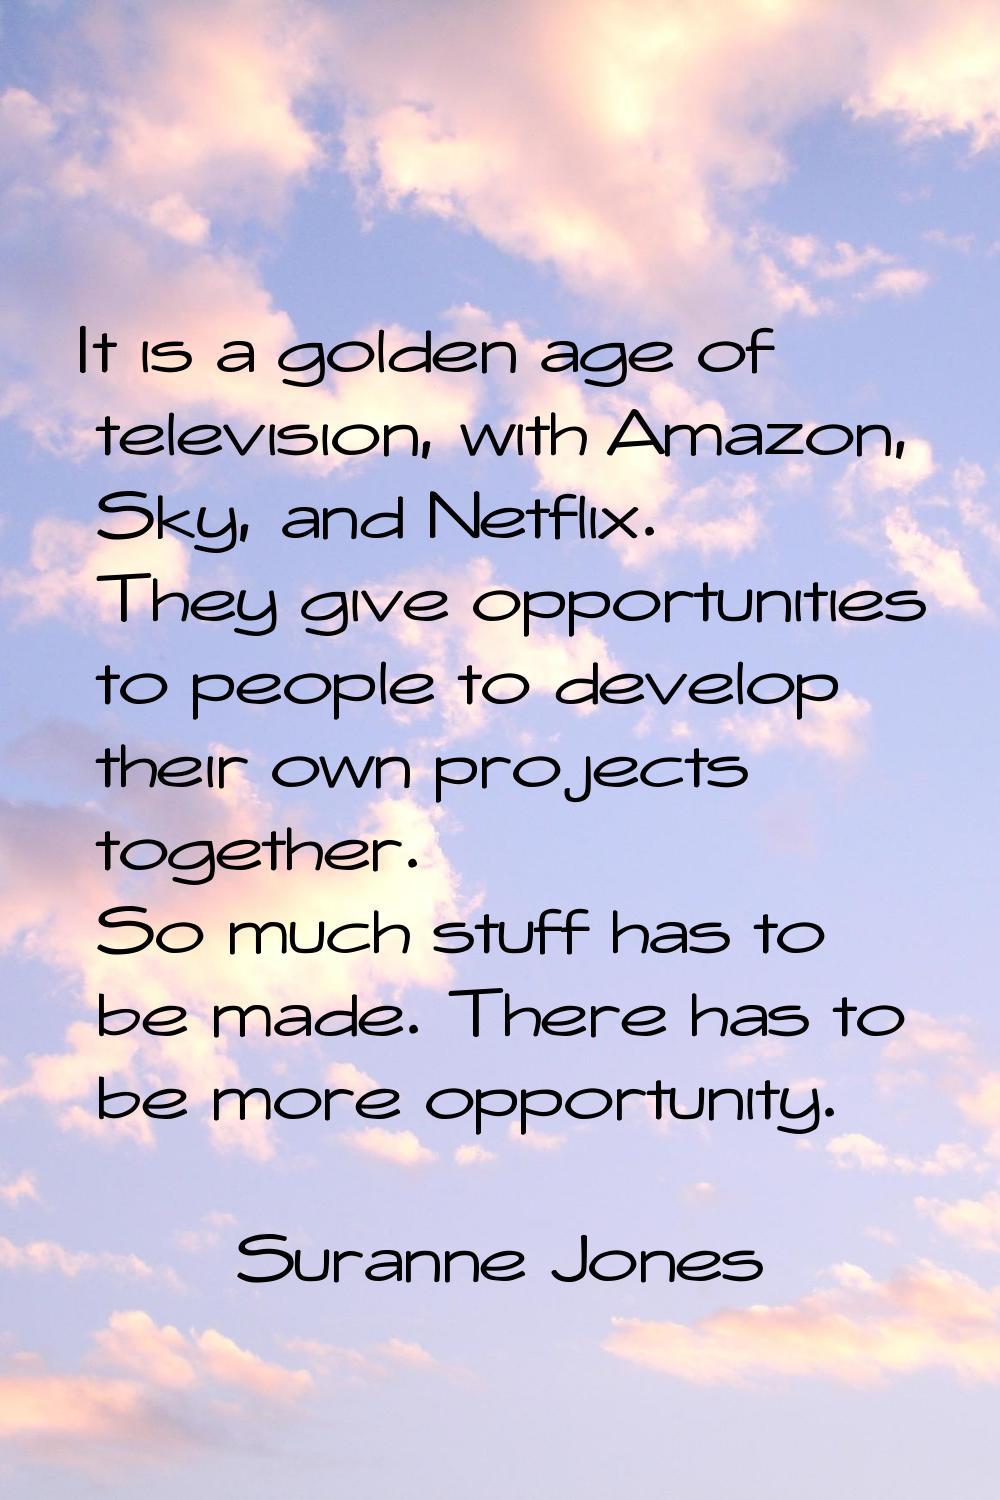 It is a golden age of television, with Amazon, Sky, and Netflix. They give opportunities to people 